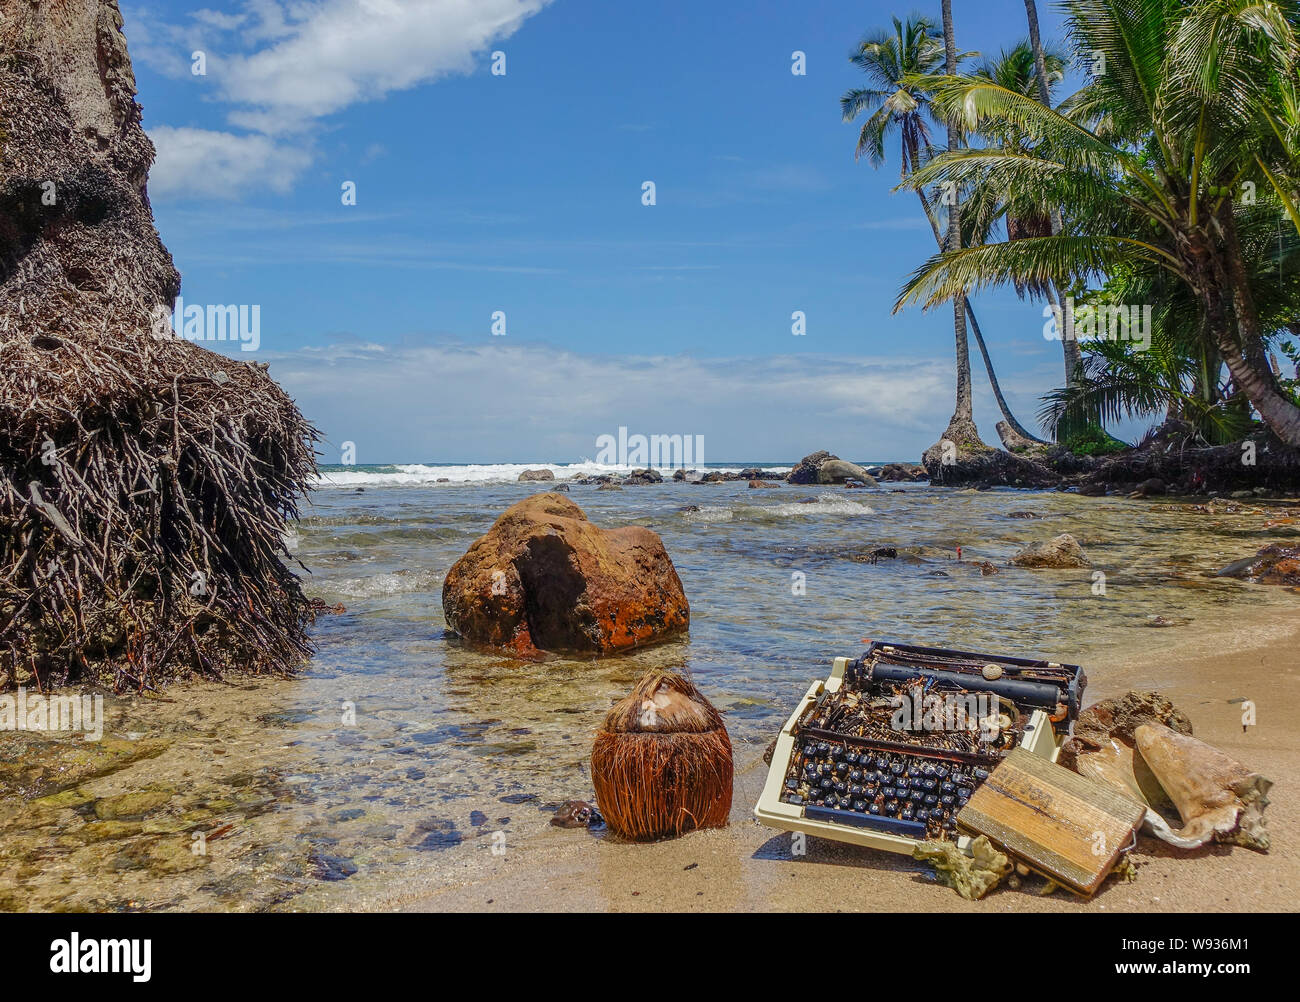 Bastimentos Island, Bocas del Toro, Panama - March 22, 2017: Old typewriter stranded on the shore of a paradisiacal beach Stock Photo